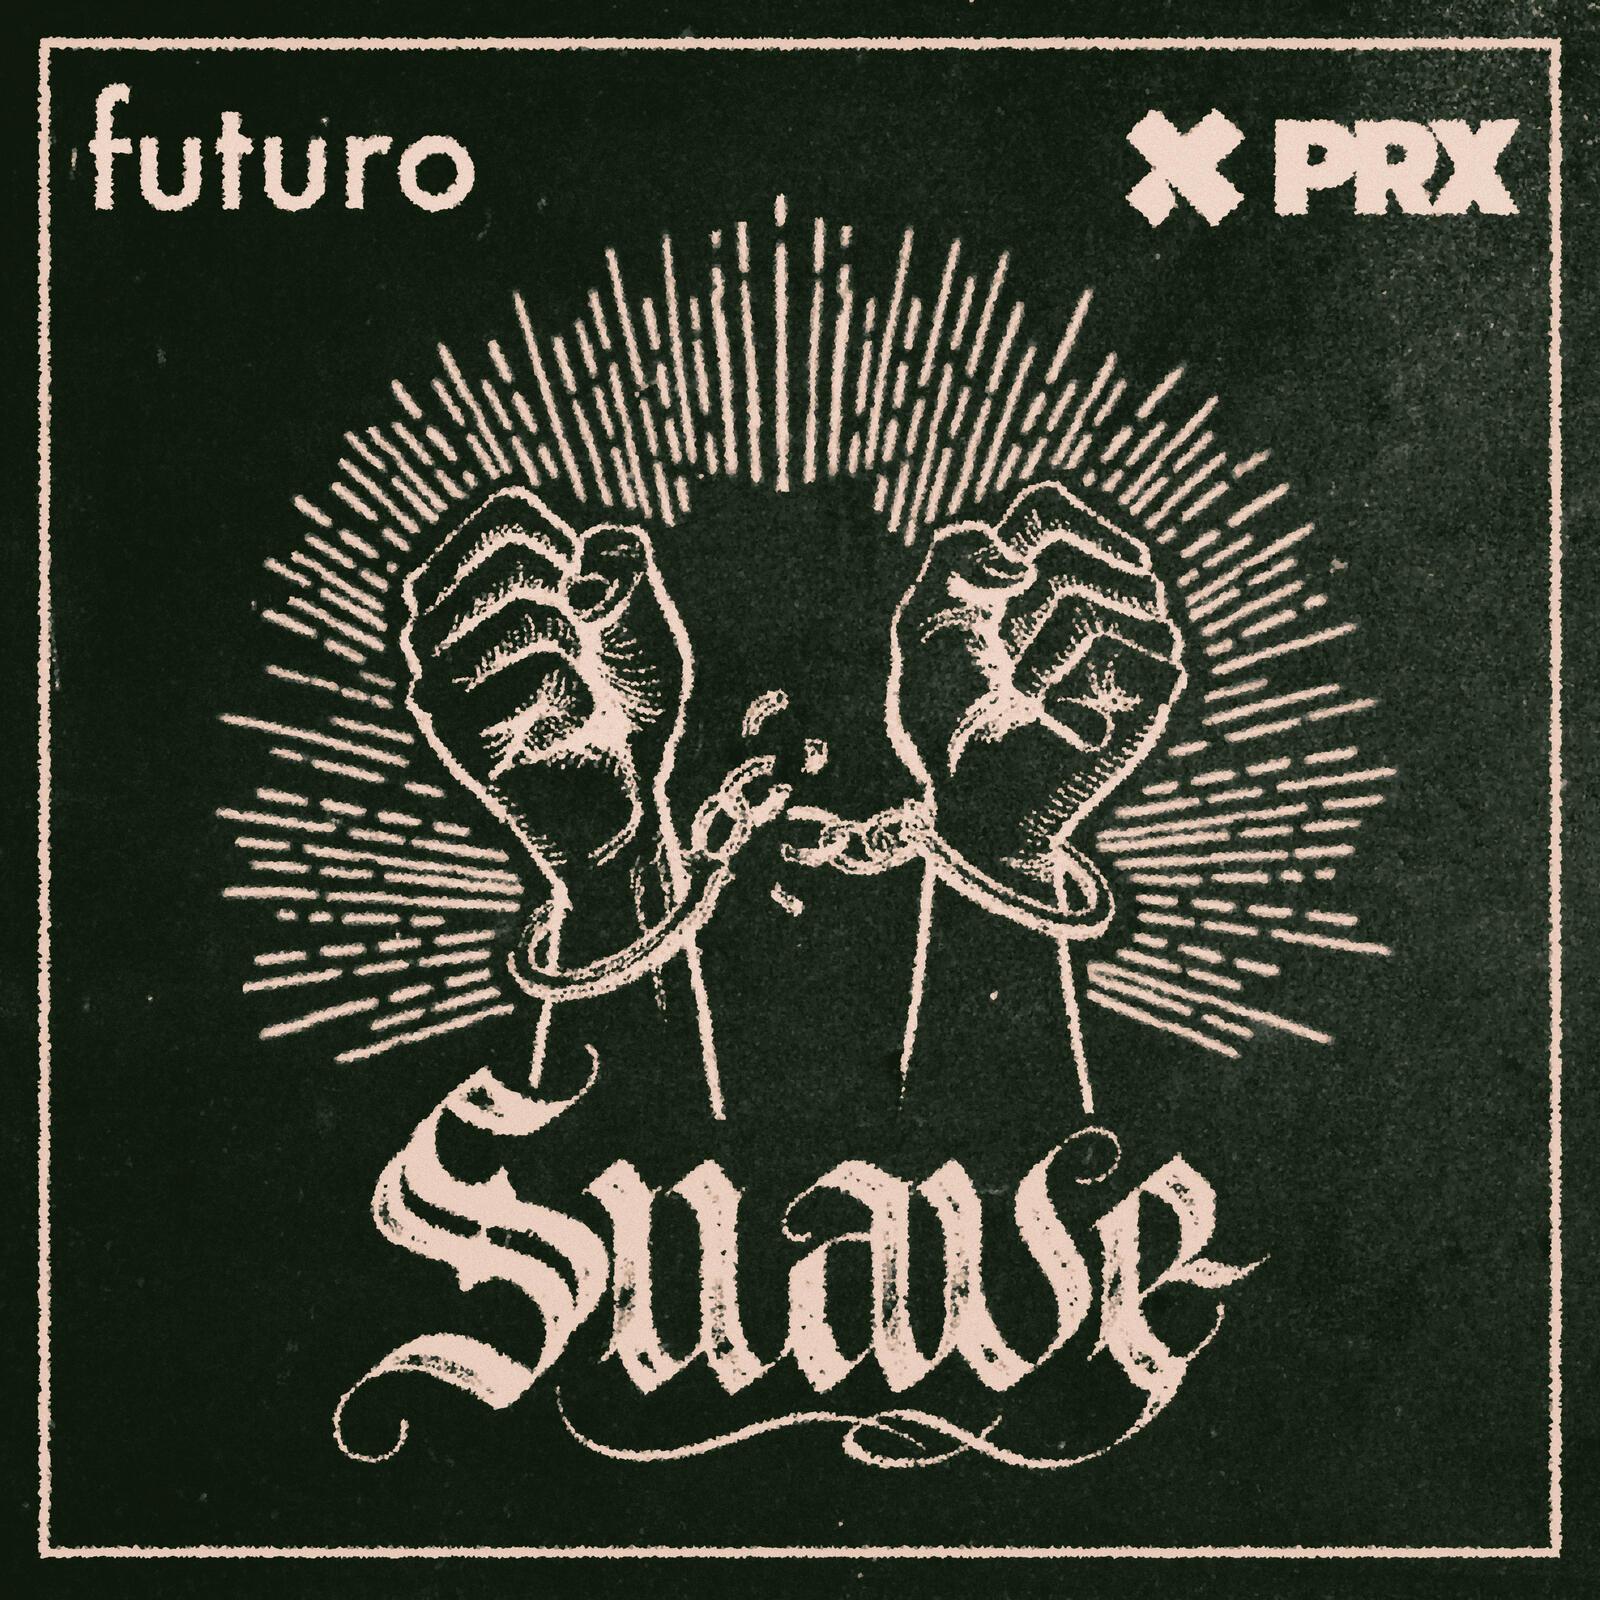 Thumbnail for "Stay Tuned for SUAVE, a New Podcast From Futuro Studios and PRX".